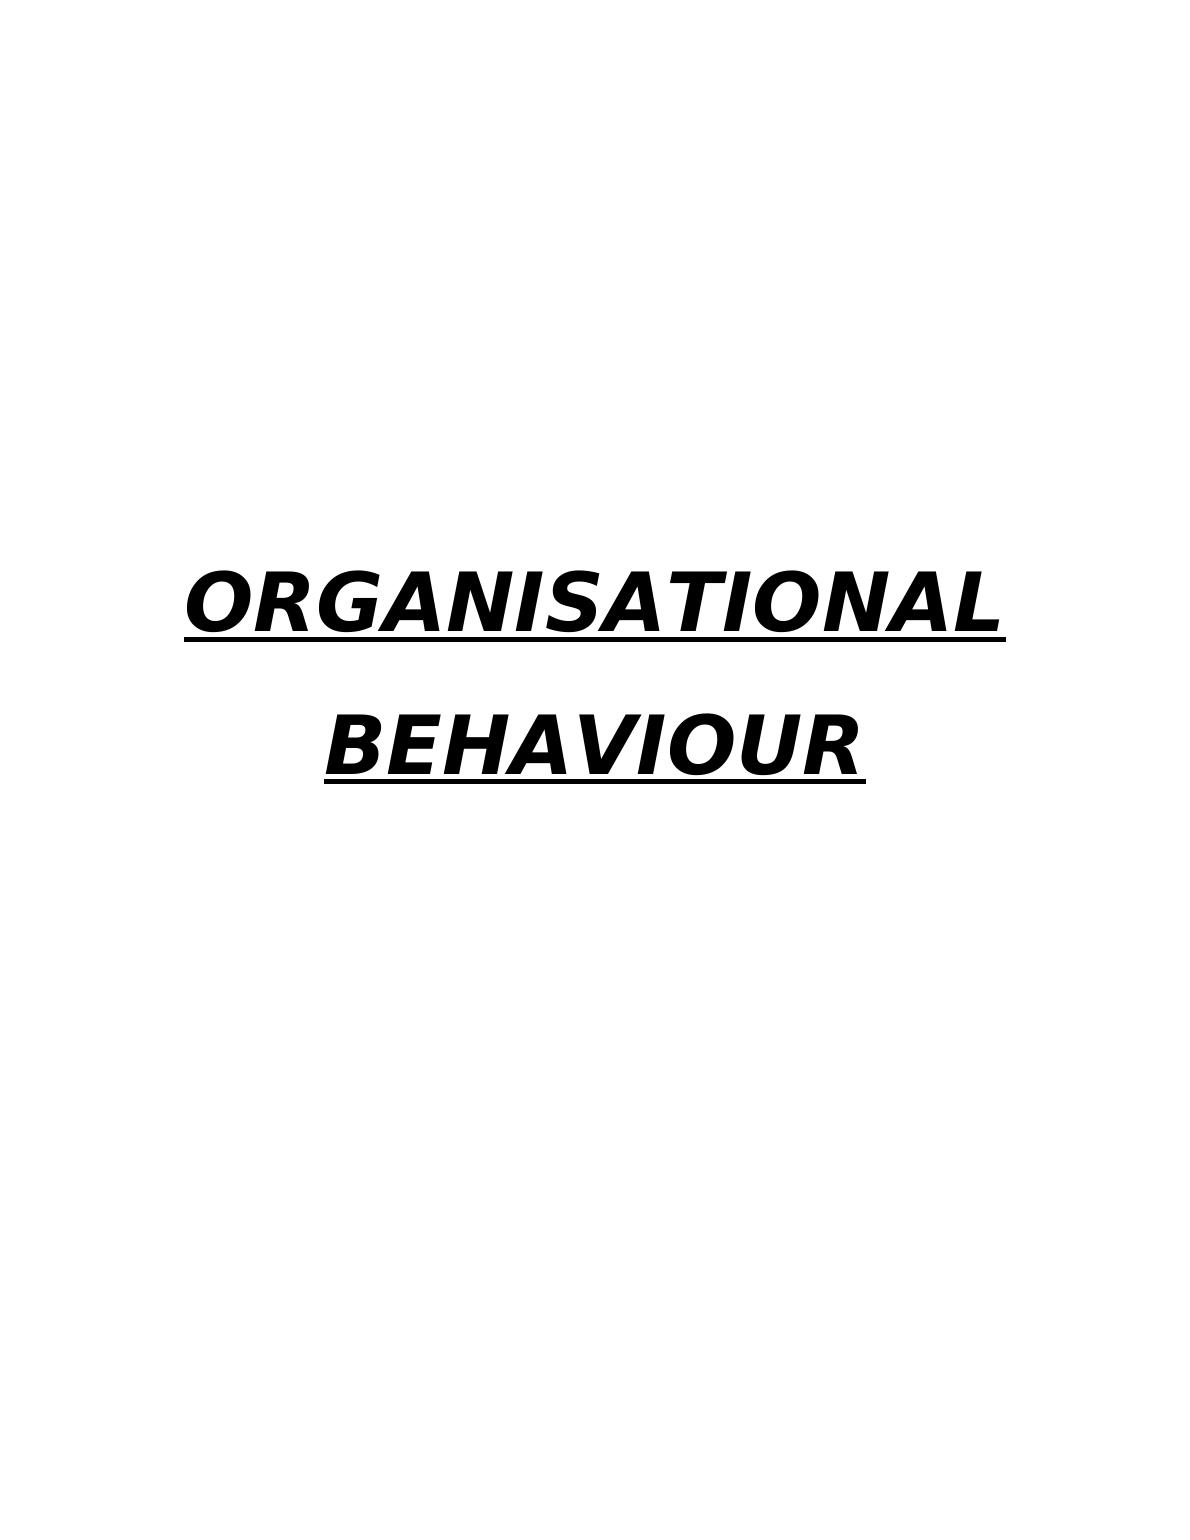 Influence of Culture, Politics, and Power on Organizational Behavior_1